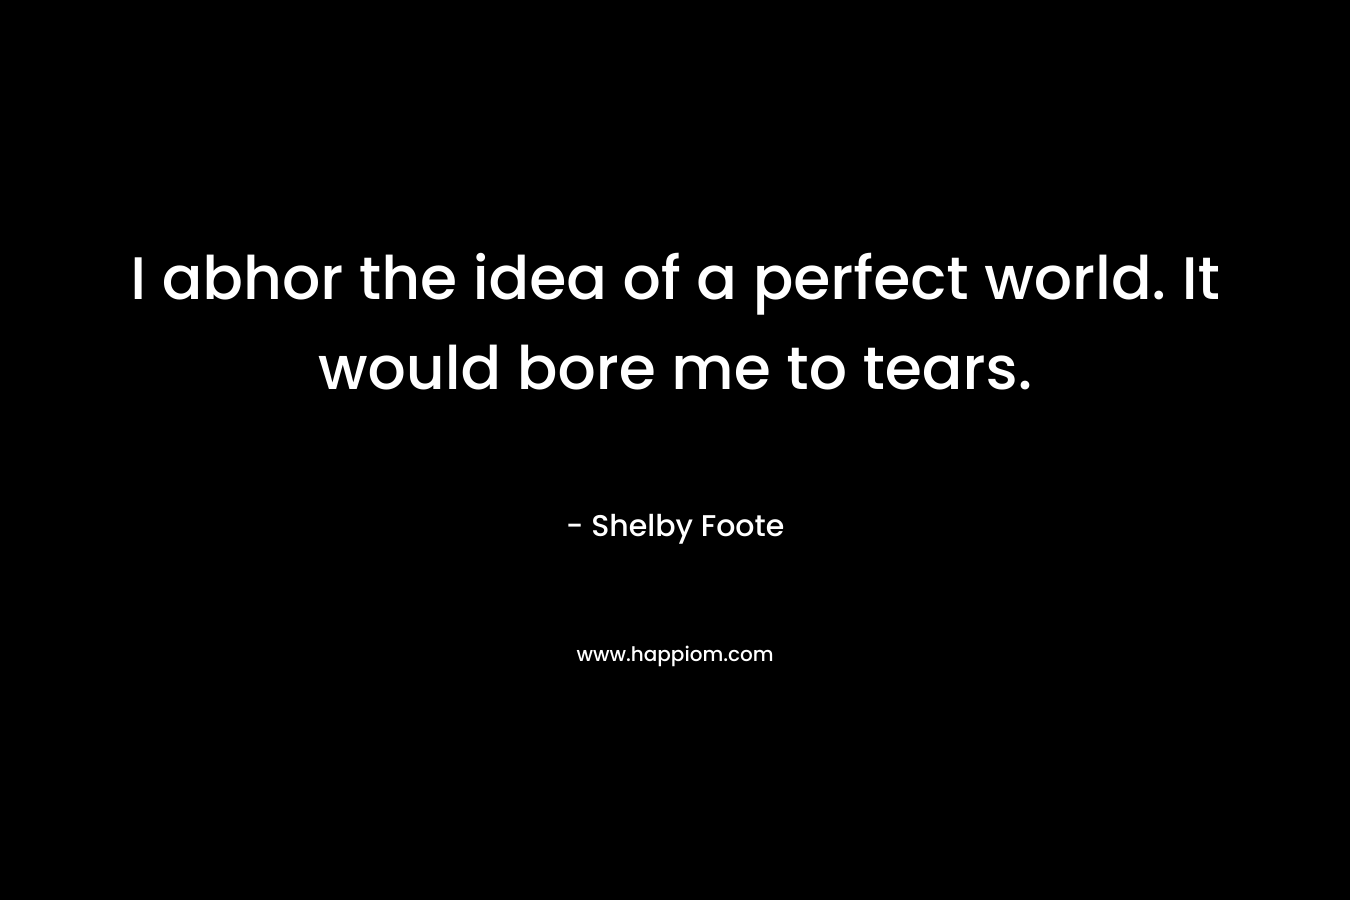 I abhor the idea of a perfect world. It would bore me to tears. – Shelby Foote